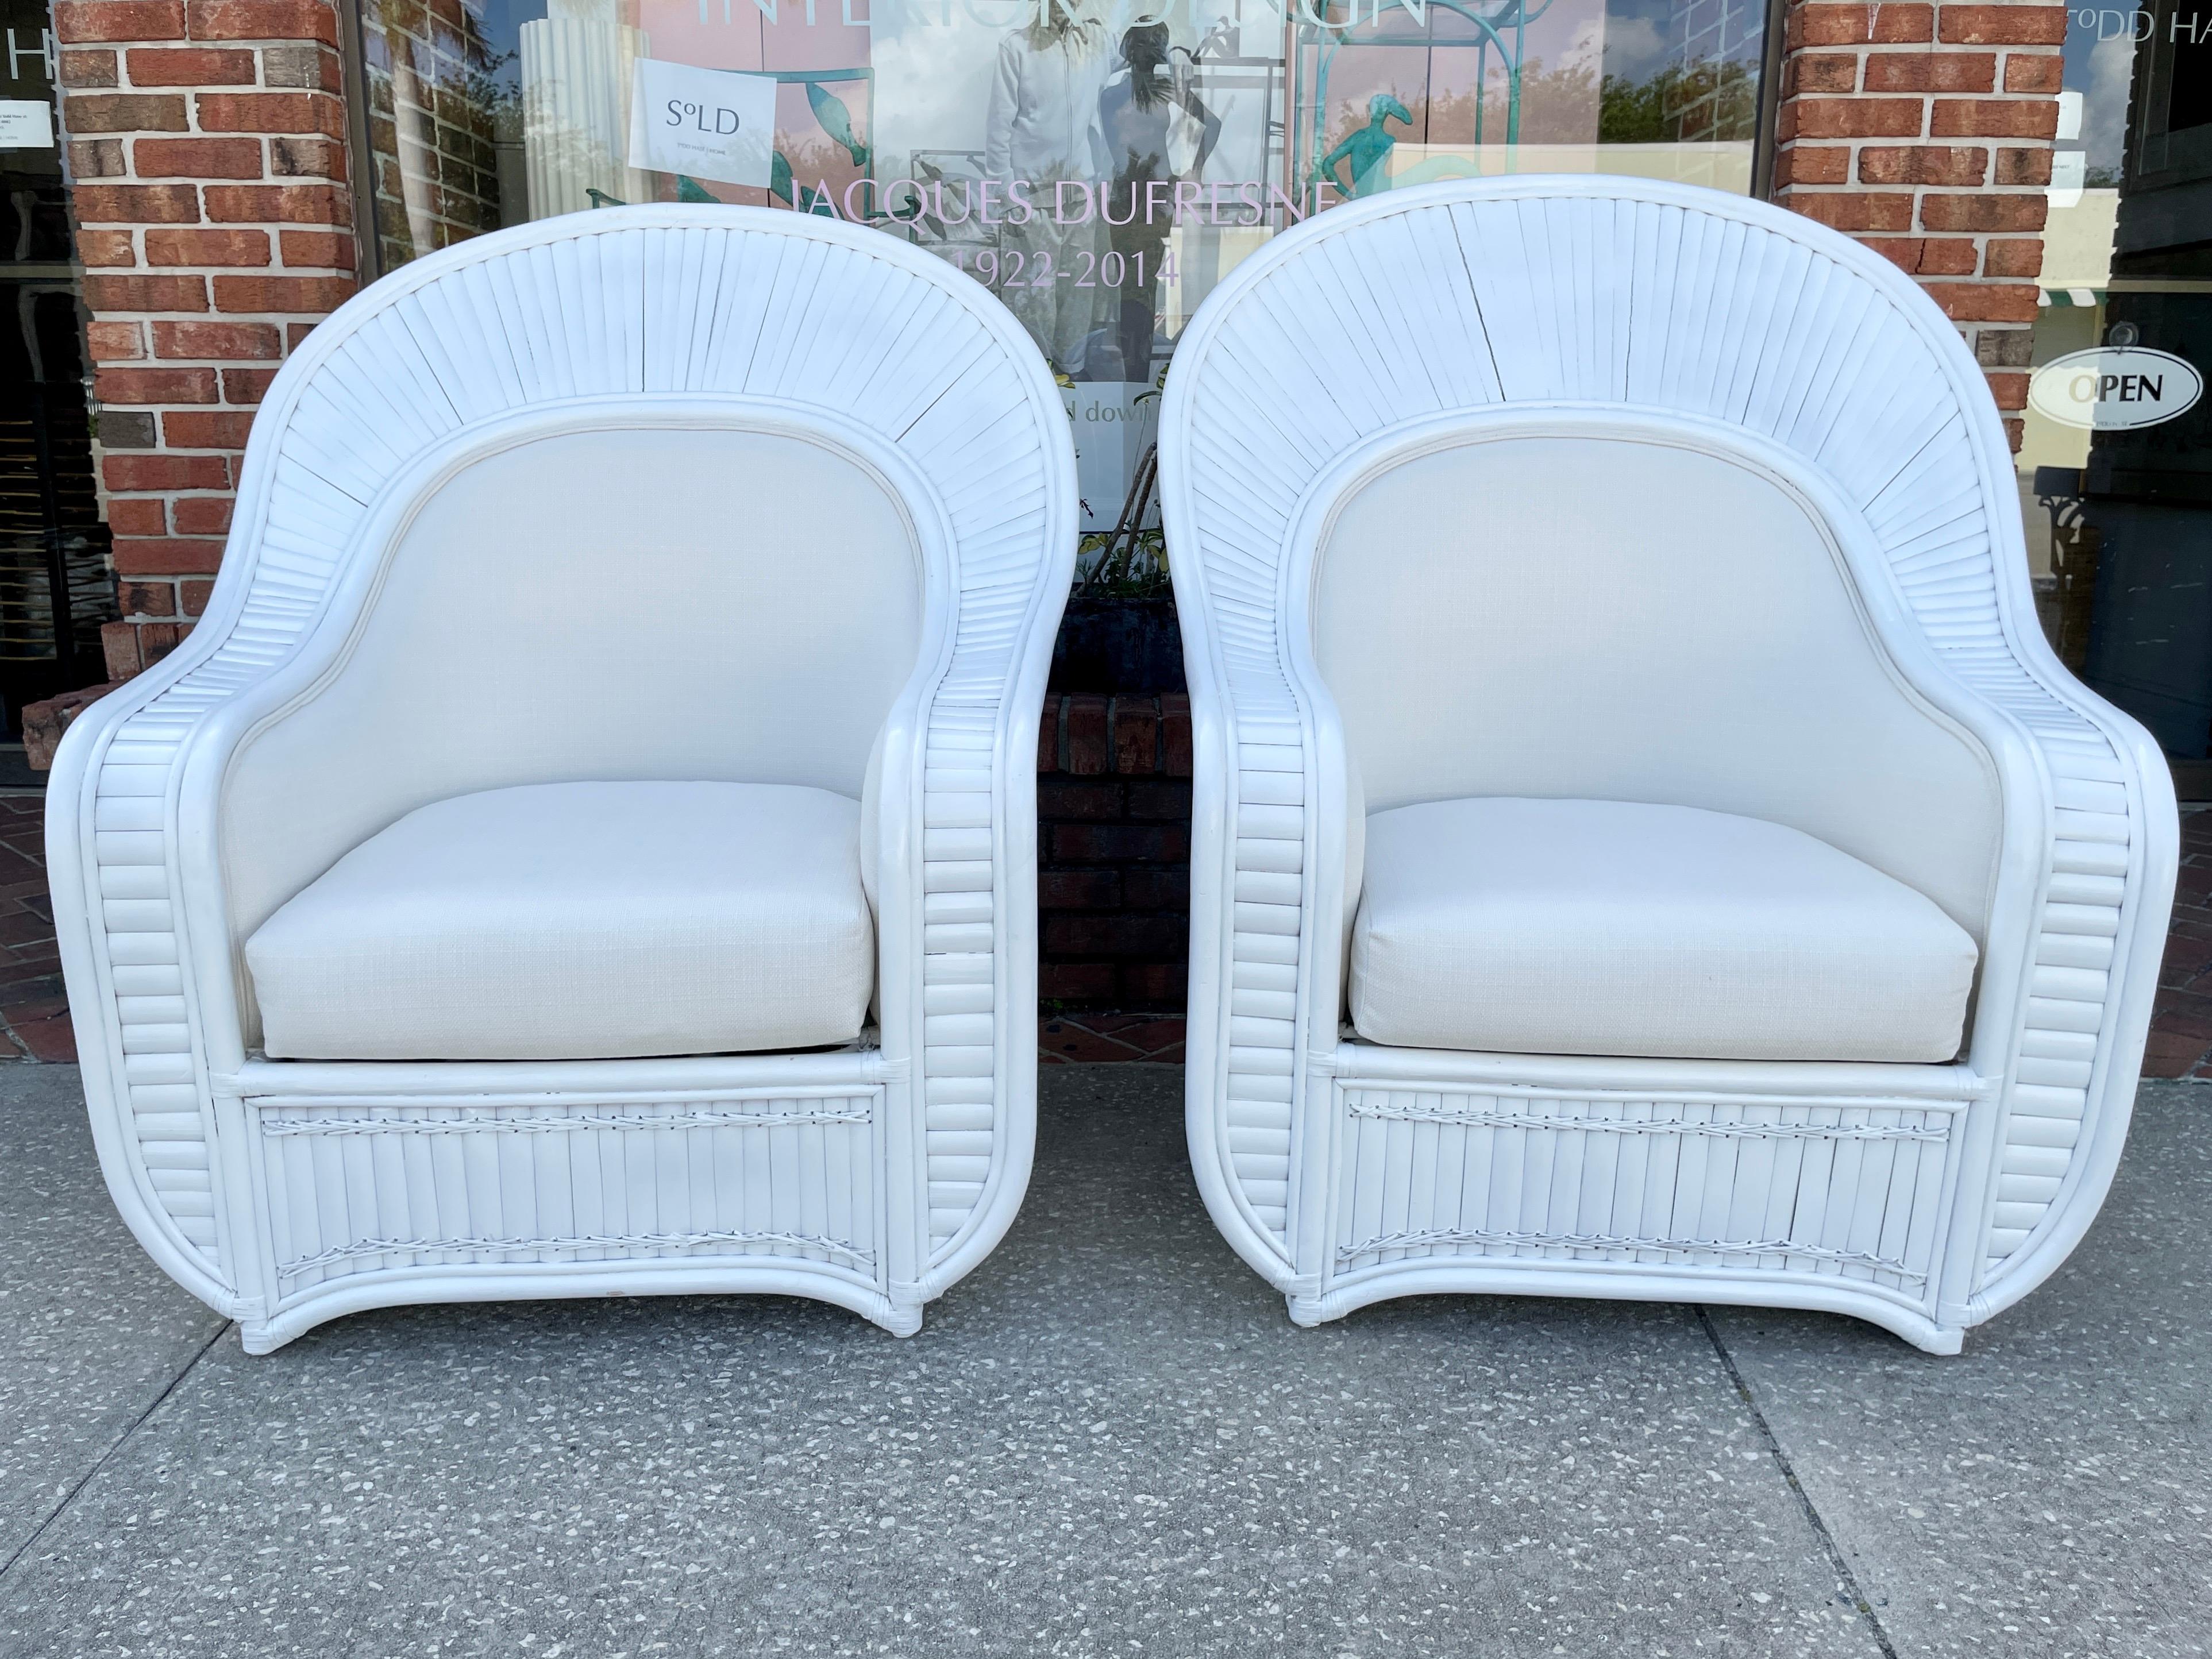 Fabulous pair of freshly lacquered in white boho chic extra large club chairs in new Todd Hase Textiles. Great addition to your boho chic inspired home. These are very rare Split Rattan Fan back club chairs.